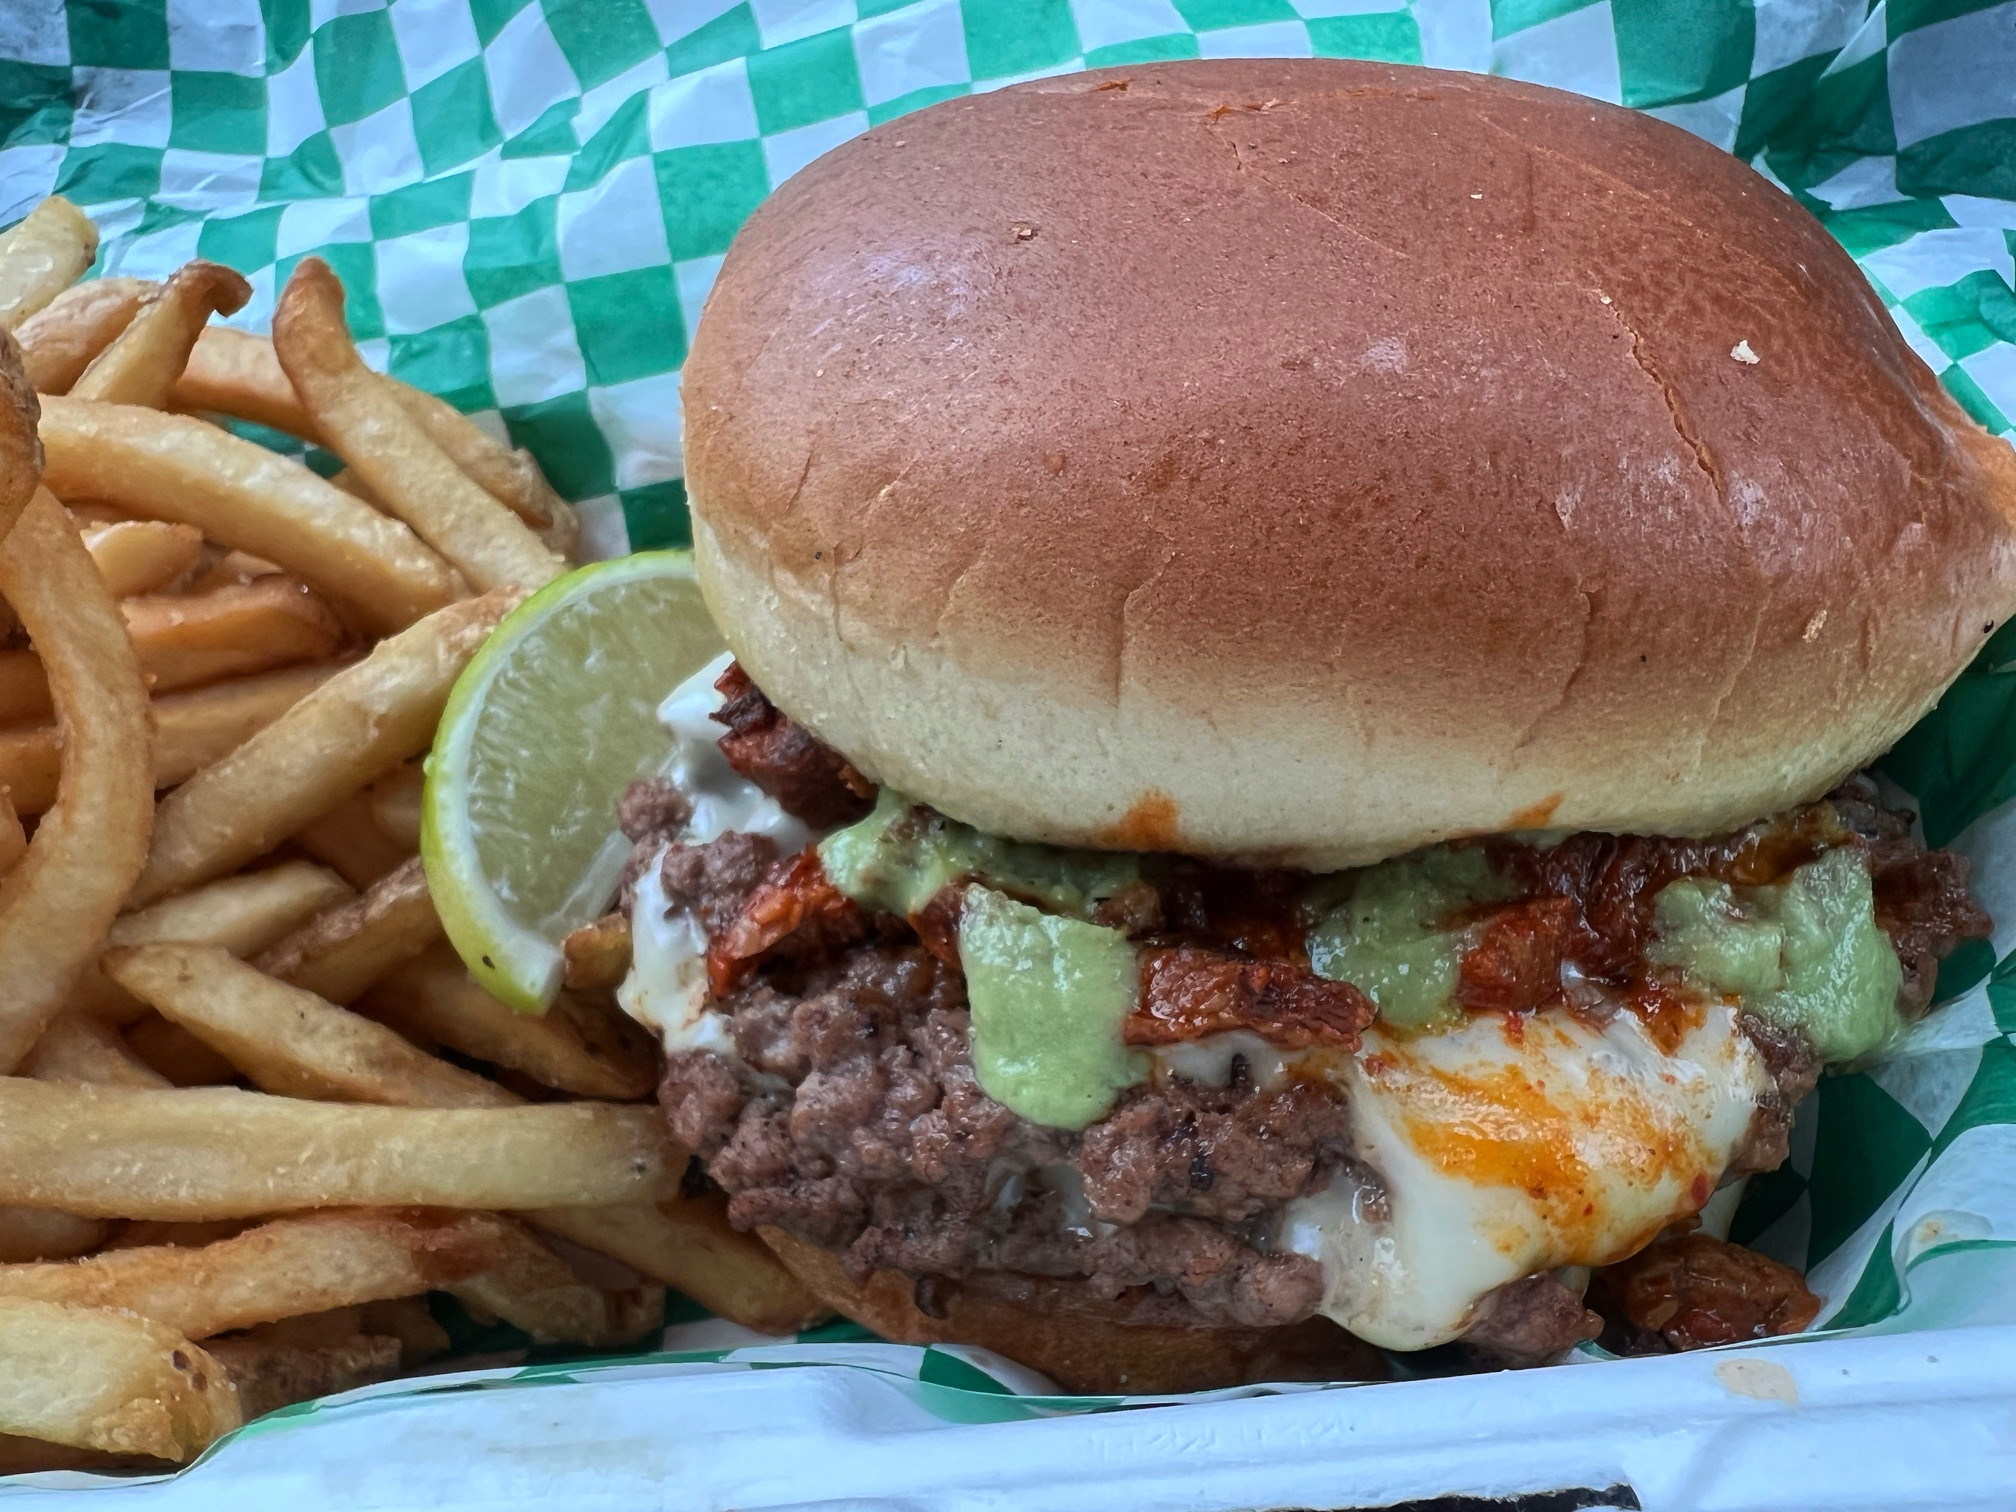 In a styrofoam container, there is a green and white checkered parchment paper with fries and a burger with guacamole salsa and melted white cheese. The burger is a collaboration of Smith Burger Co and Maize Mexican Grill for May 5th. Photo by Alyssa Buckley. 